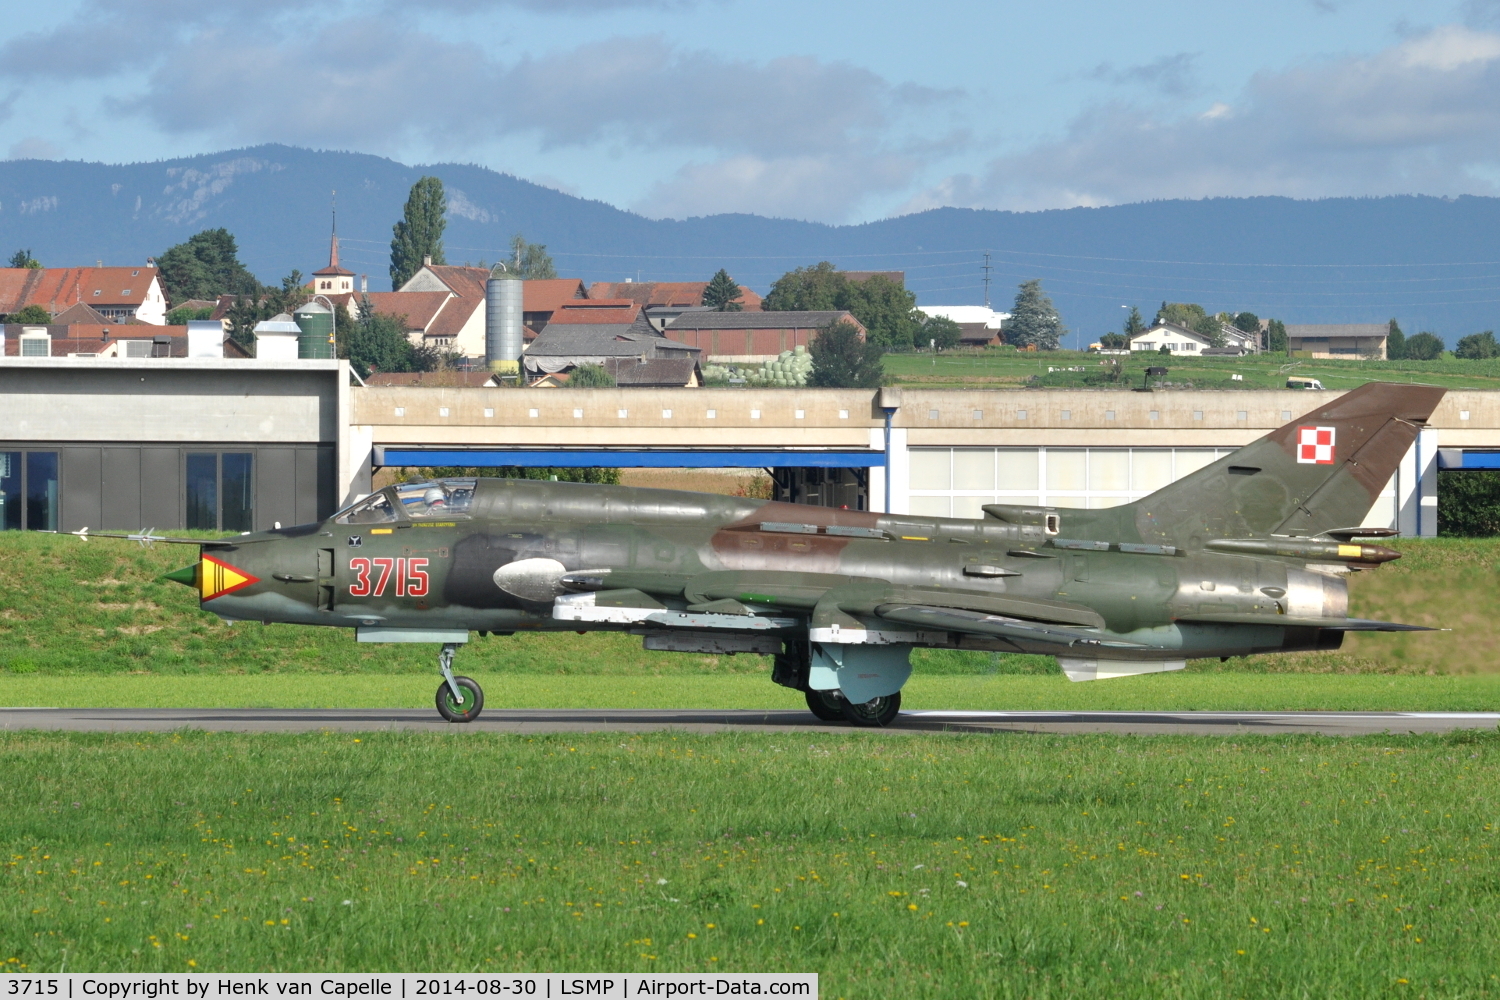 3715, Sukhoi Su-22M-4 C/N 37715, Sukhoi Su-22M-4 of the Polish air Force ready for take off for an air display at Payerne Air Base, Switzerland.